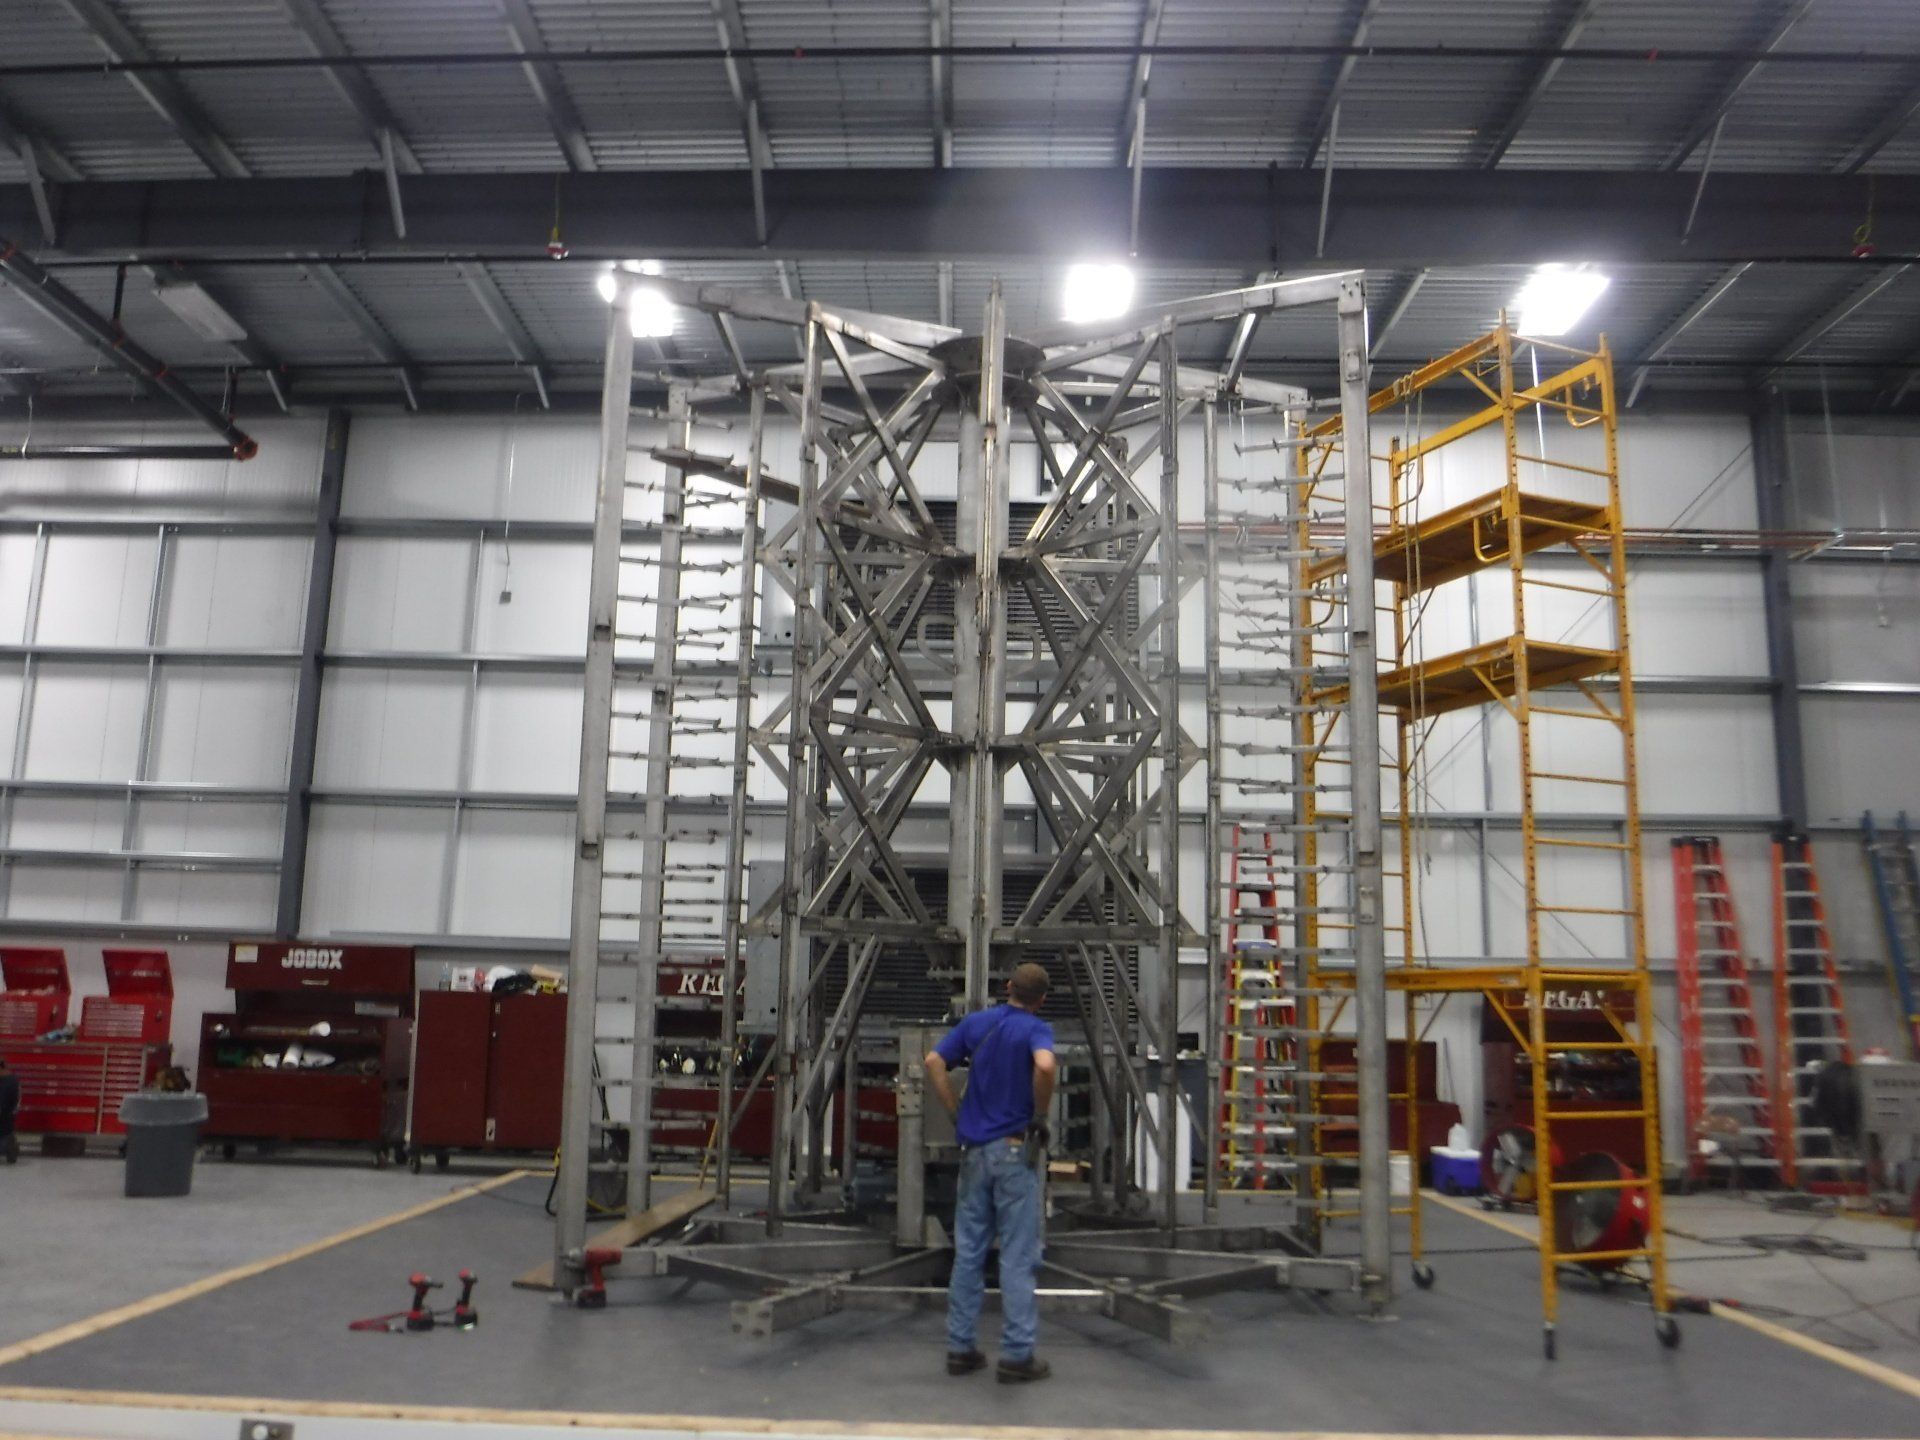 A man is standing in front of a large metal structure in a warehouse – USA - Regal Construction Inc.